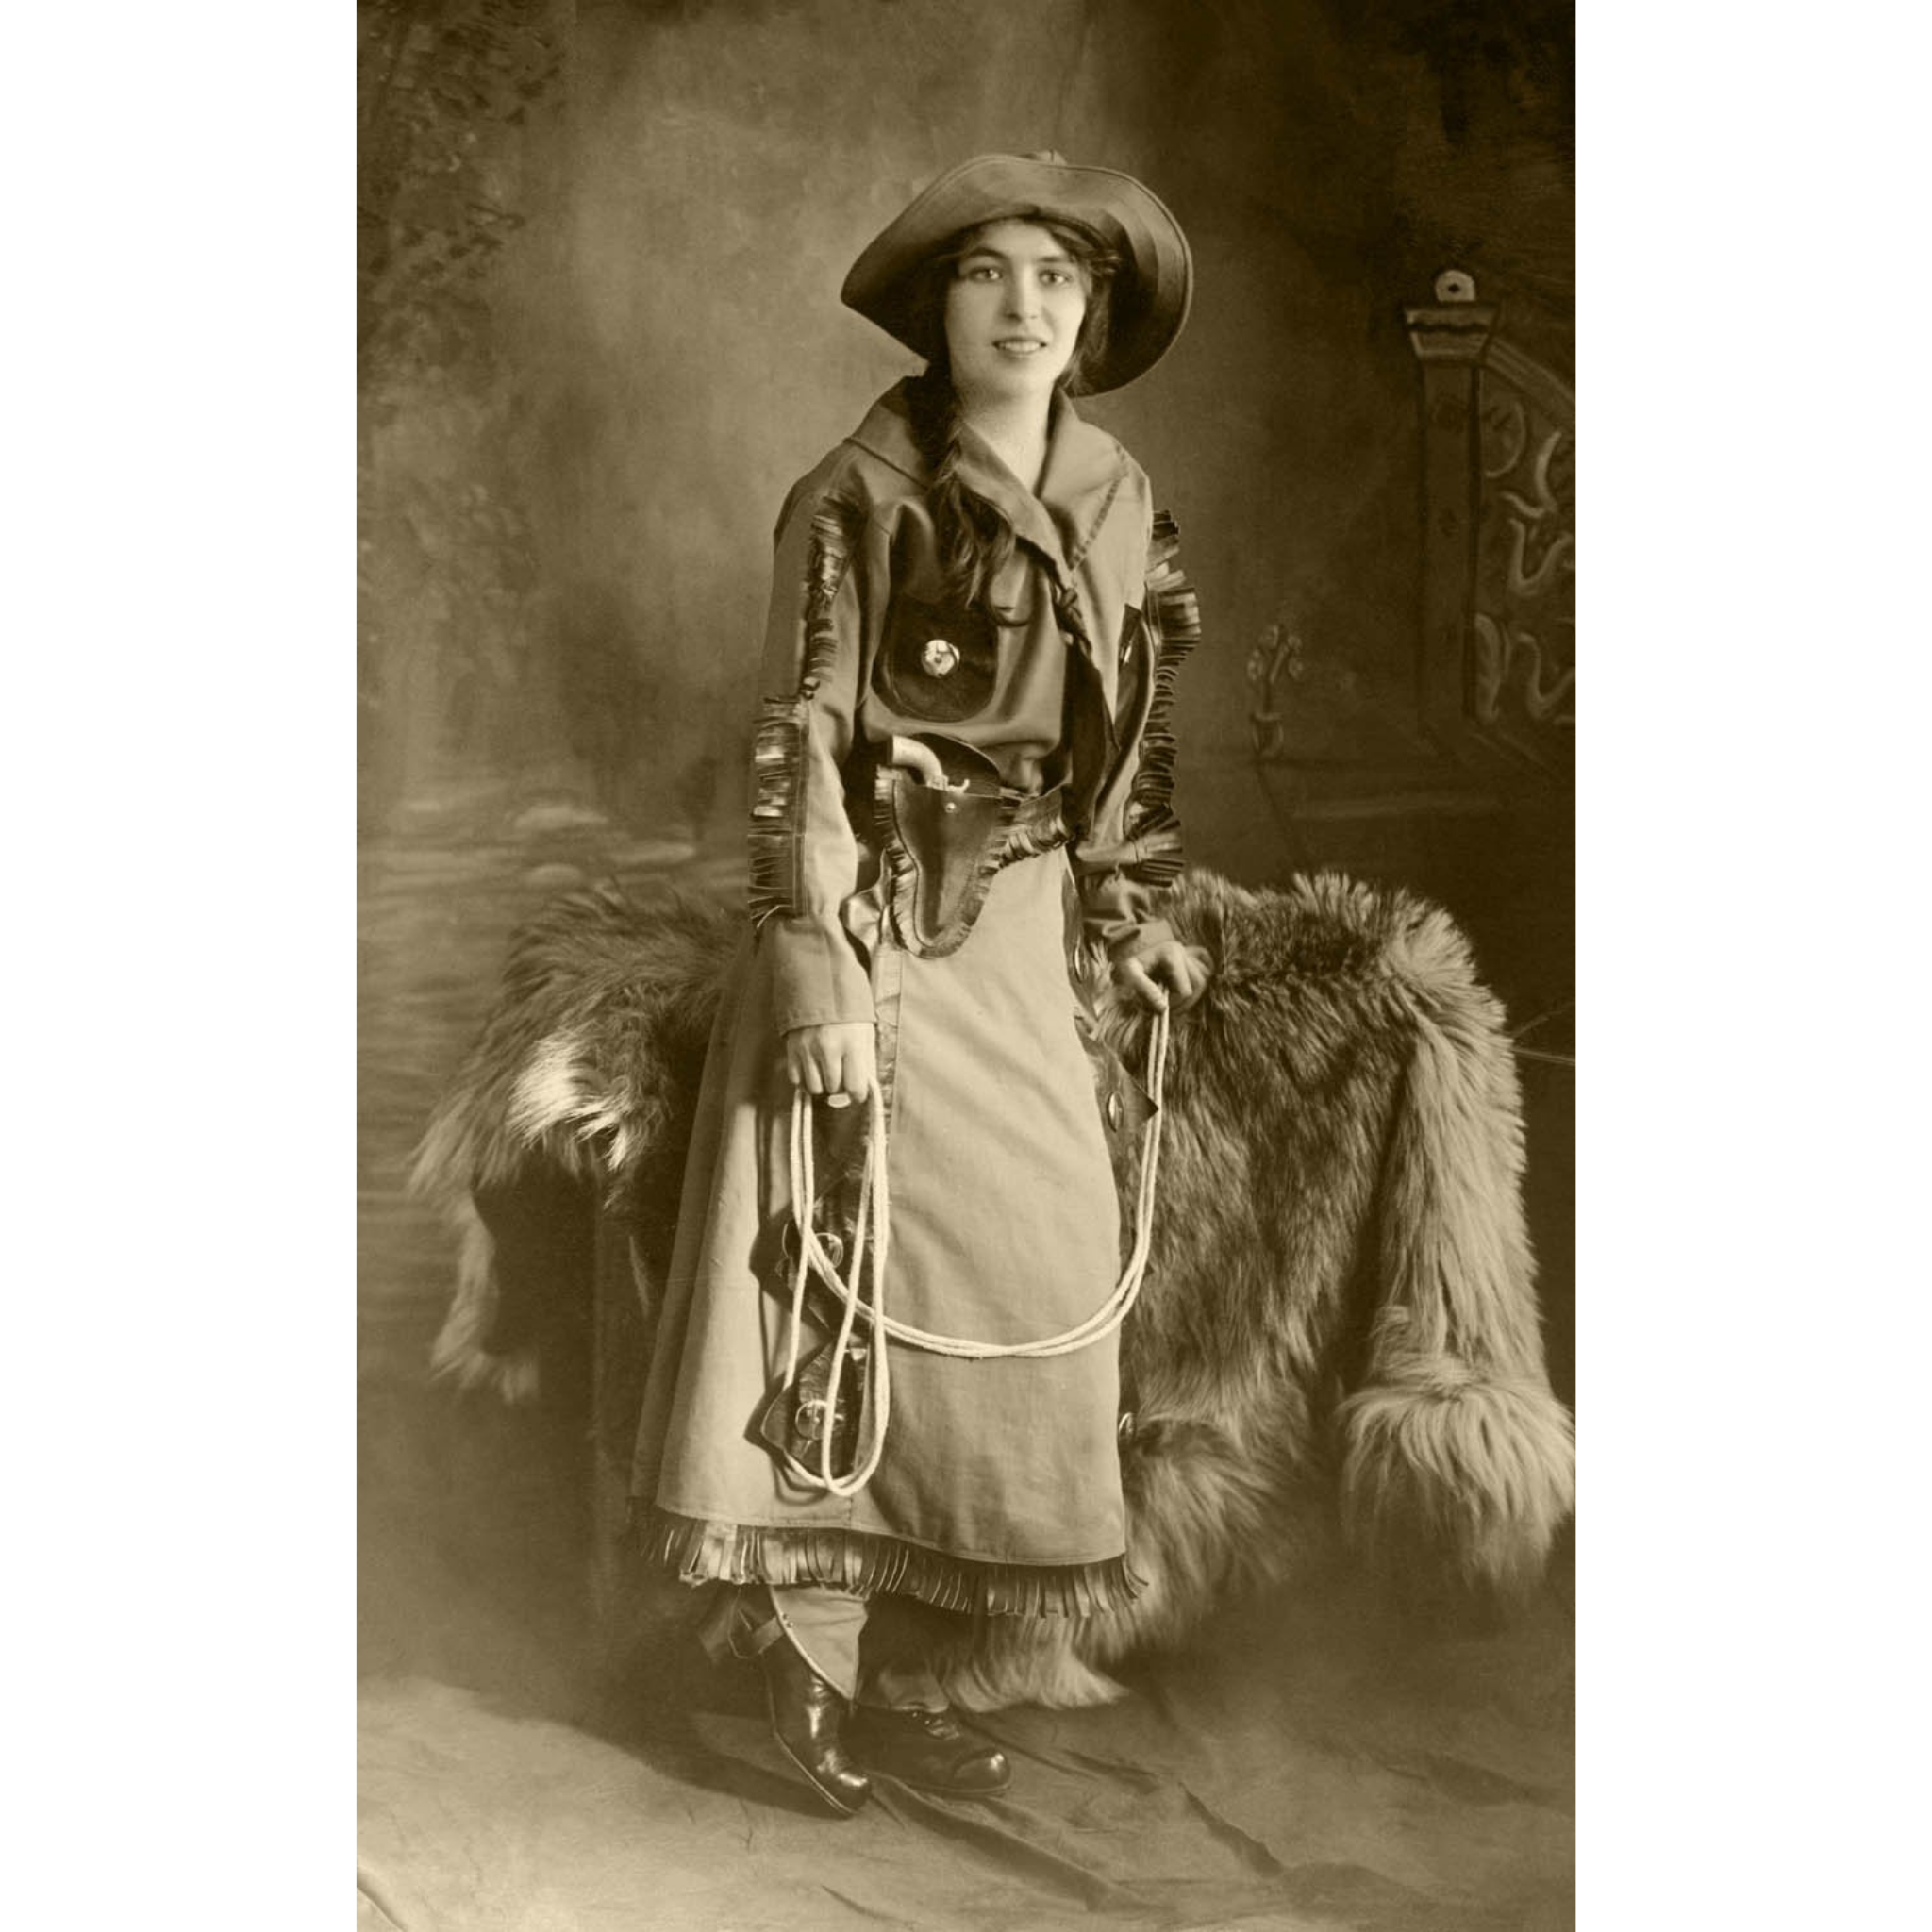 Cowgirl with Gun Holding Lariat - ca. 1915 Photograph